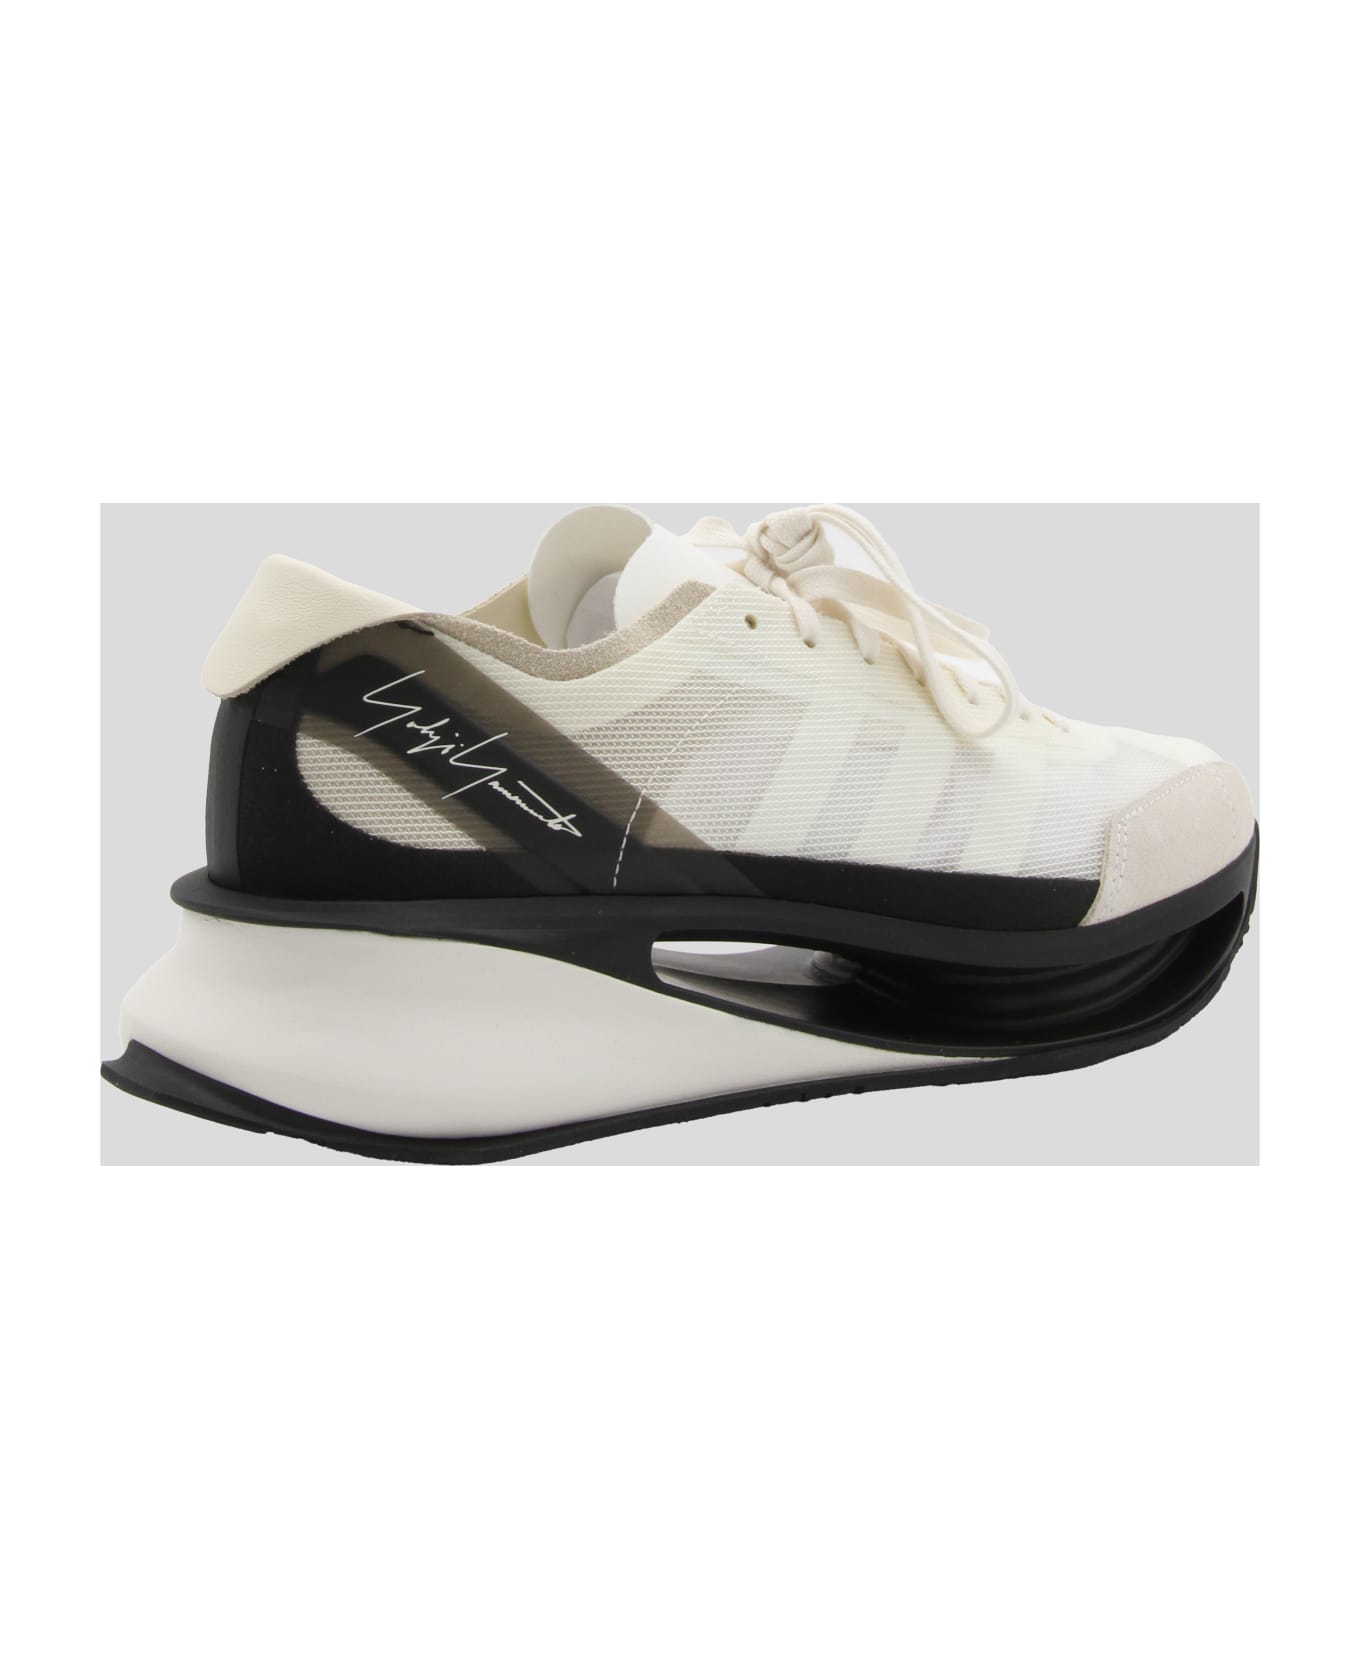 Y-3 Off White Sneakers - White and black